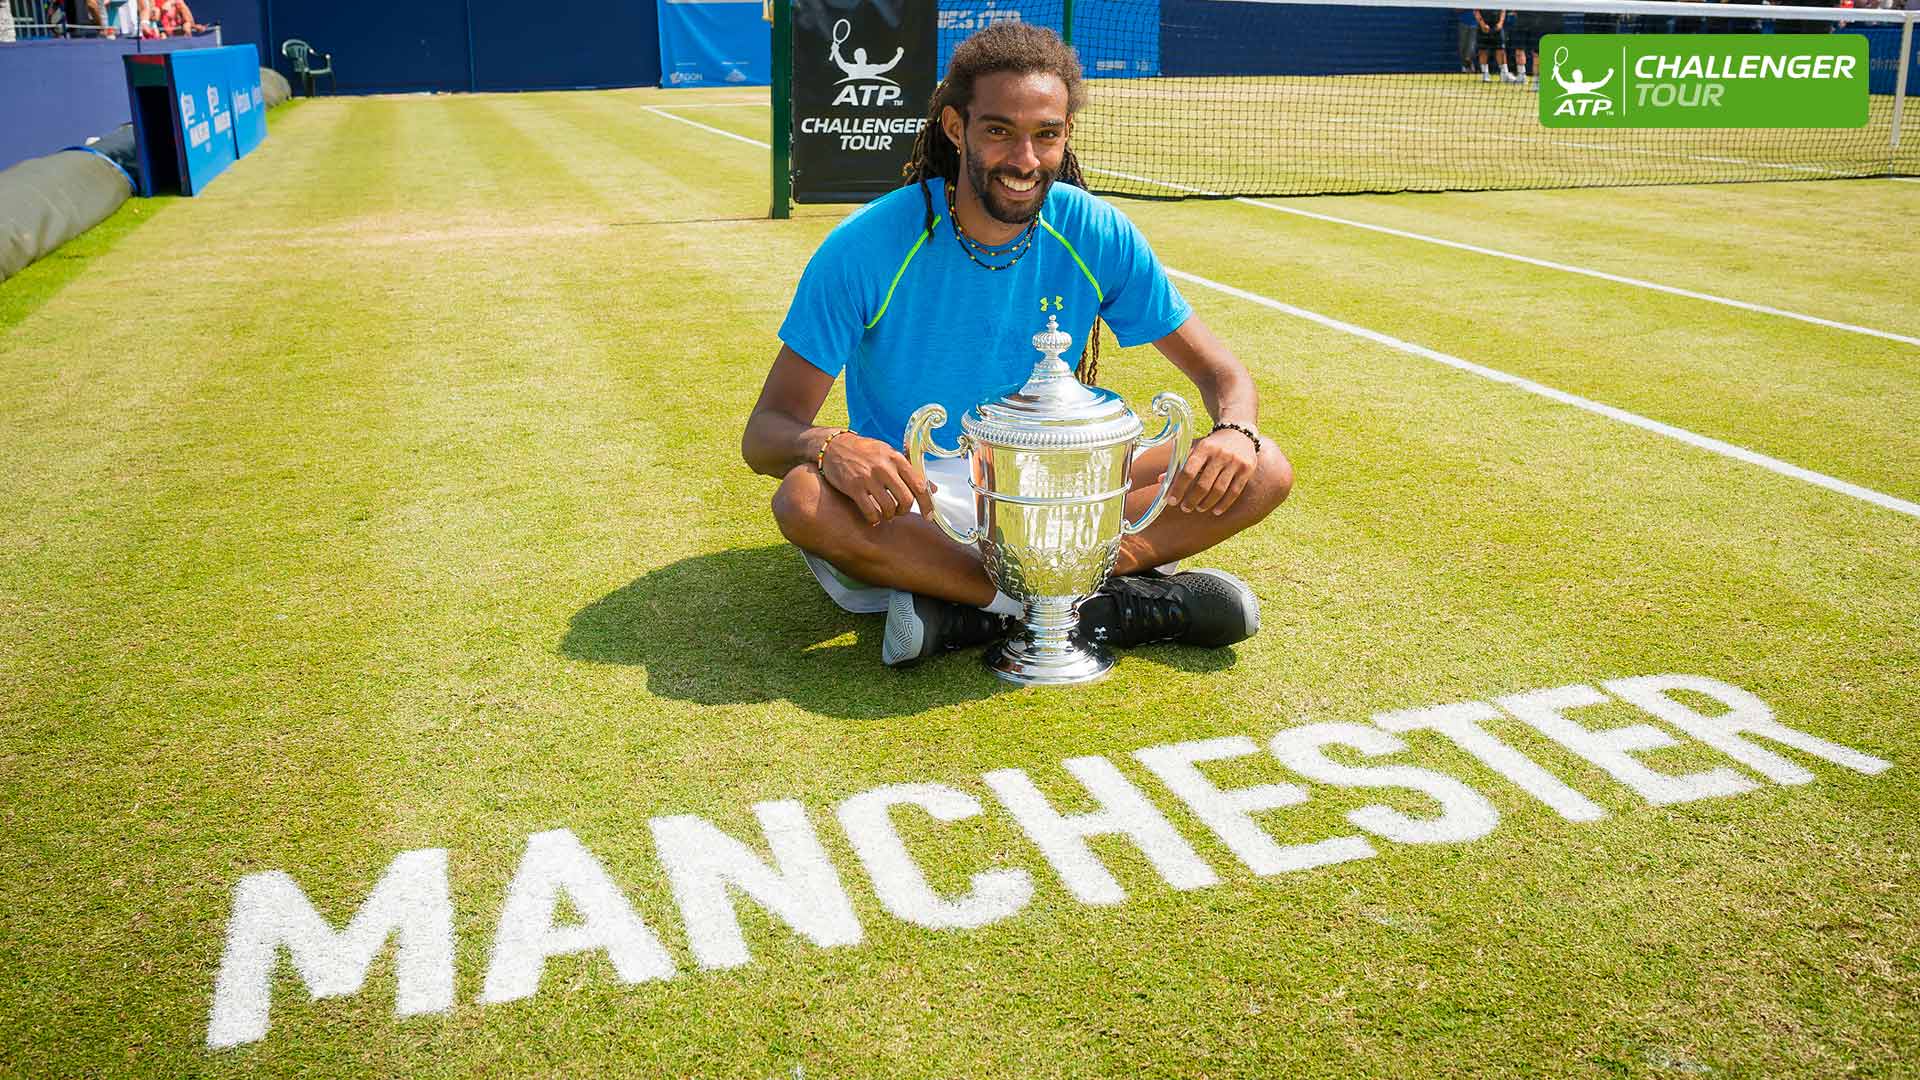 Dustin Brown won his first ATP Challenger Tour title of the year in Manchester.